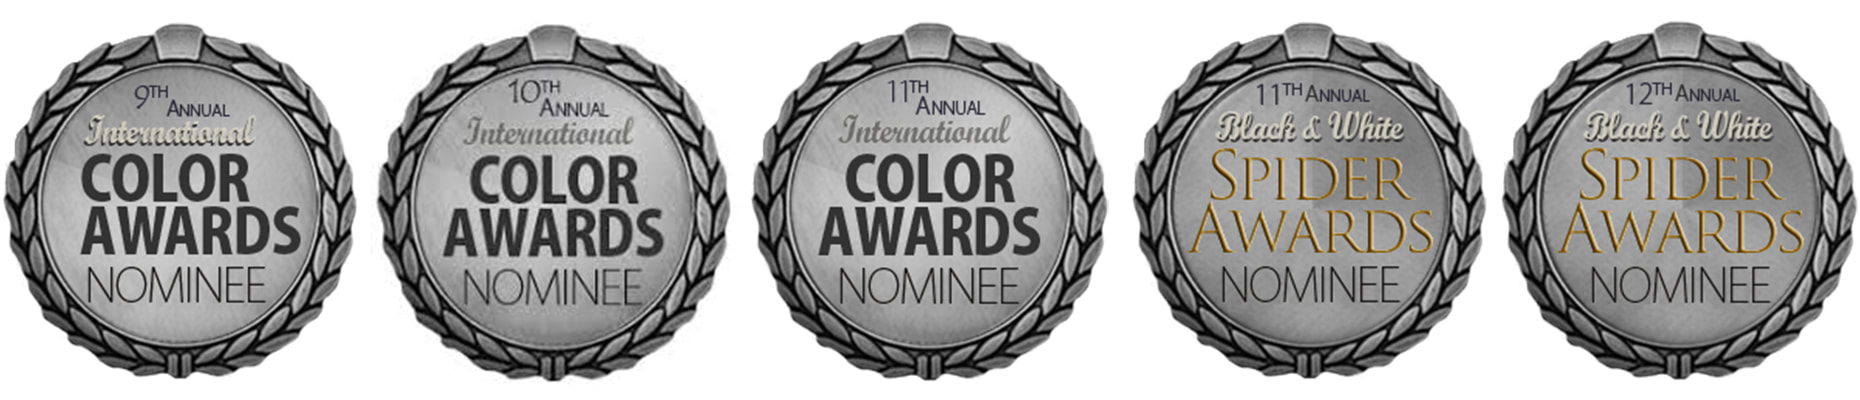 Nominee medals, International Color Awards, Black & White Spider Awards, Catherine Bailey Photography